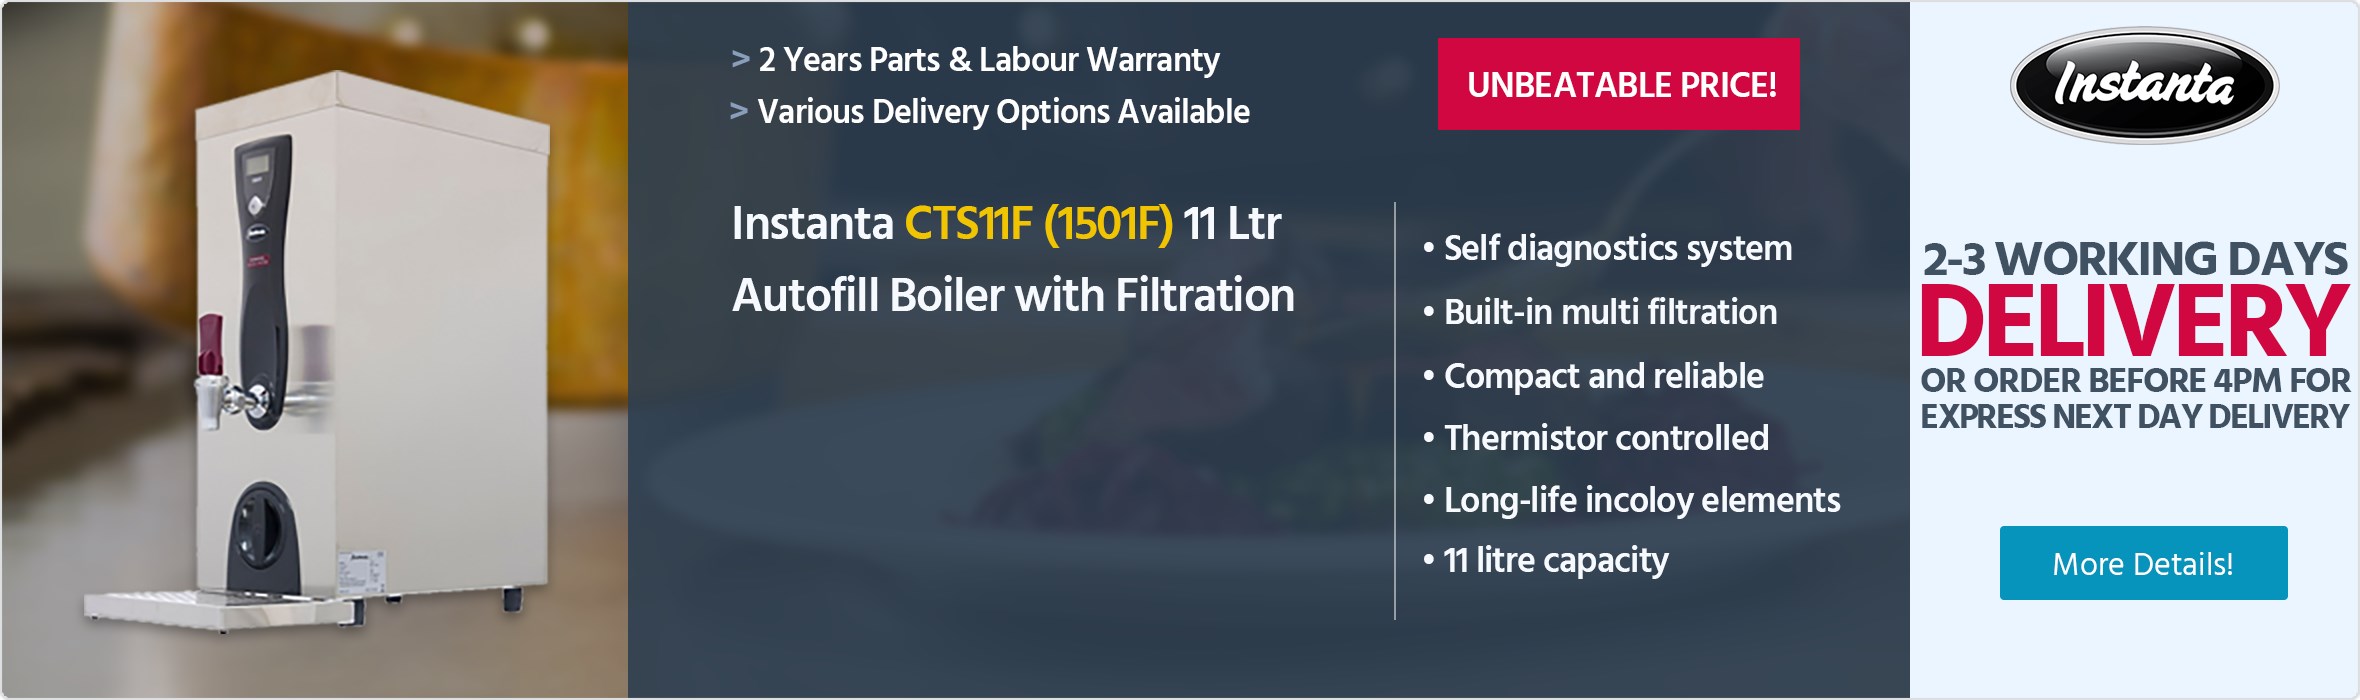 Instanta CTS11F 11 Ltr Autofill Boiler with Filtration